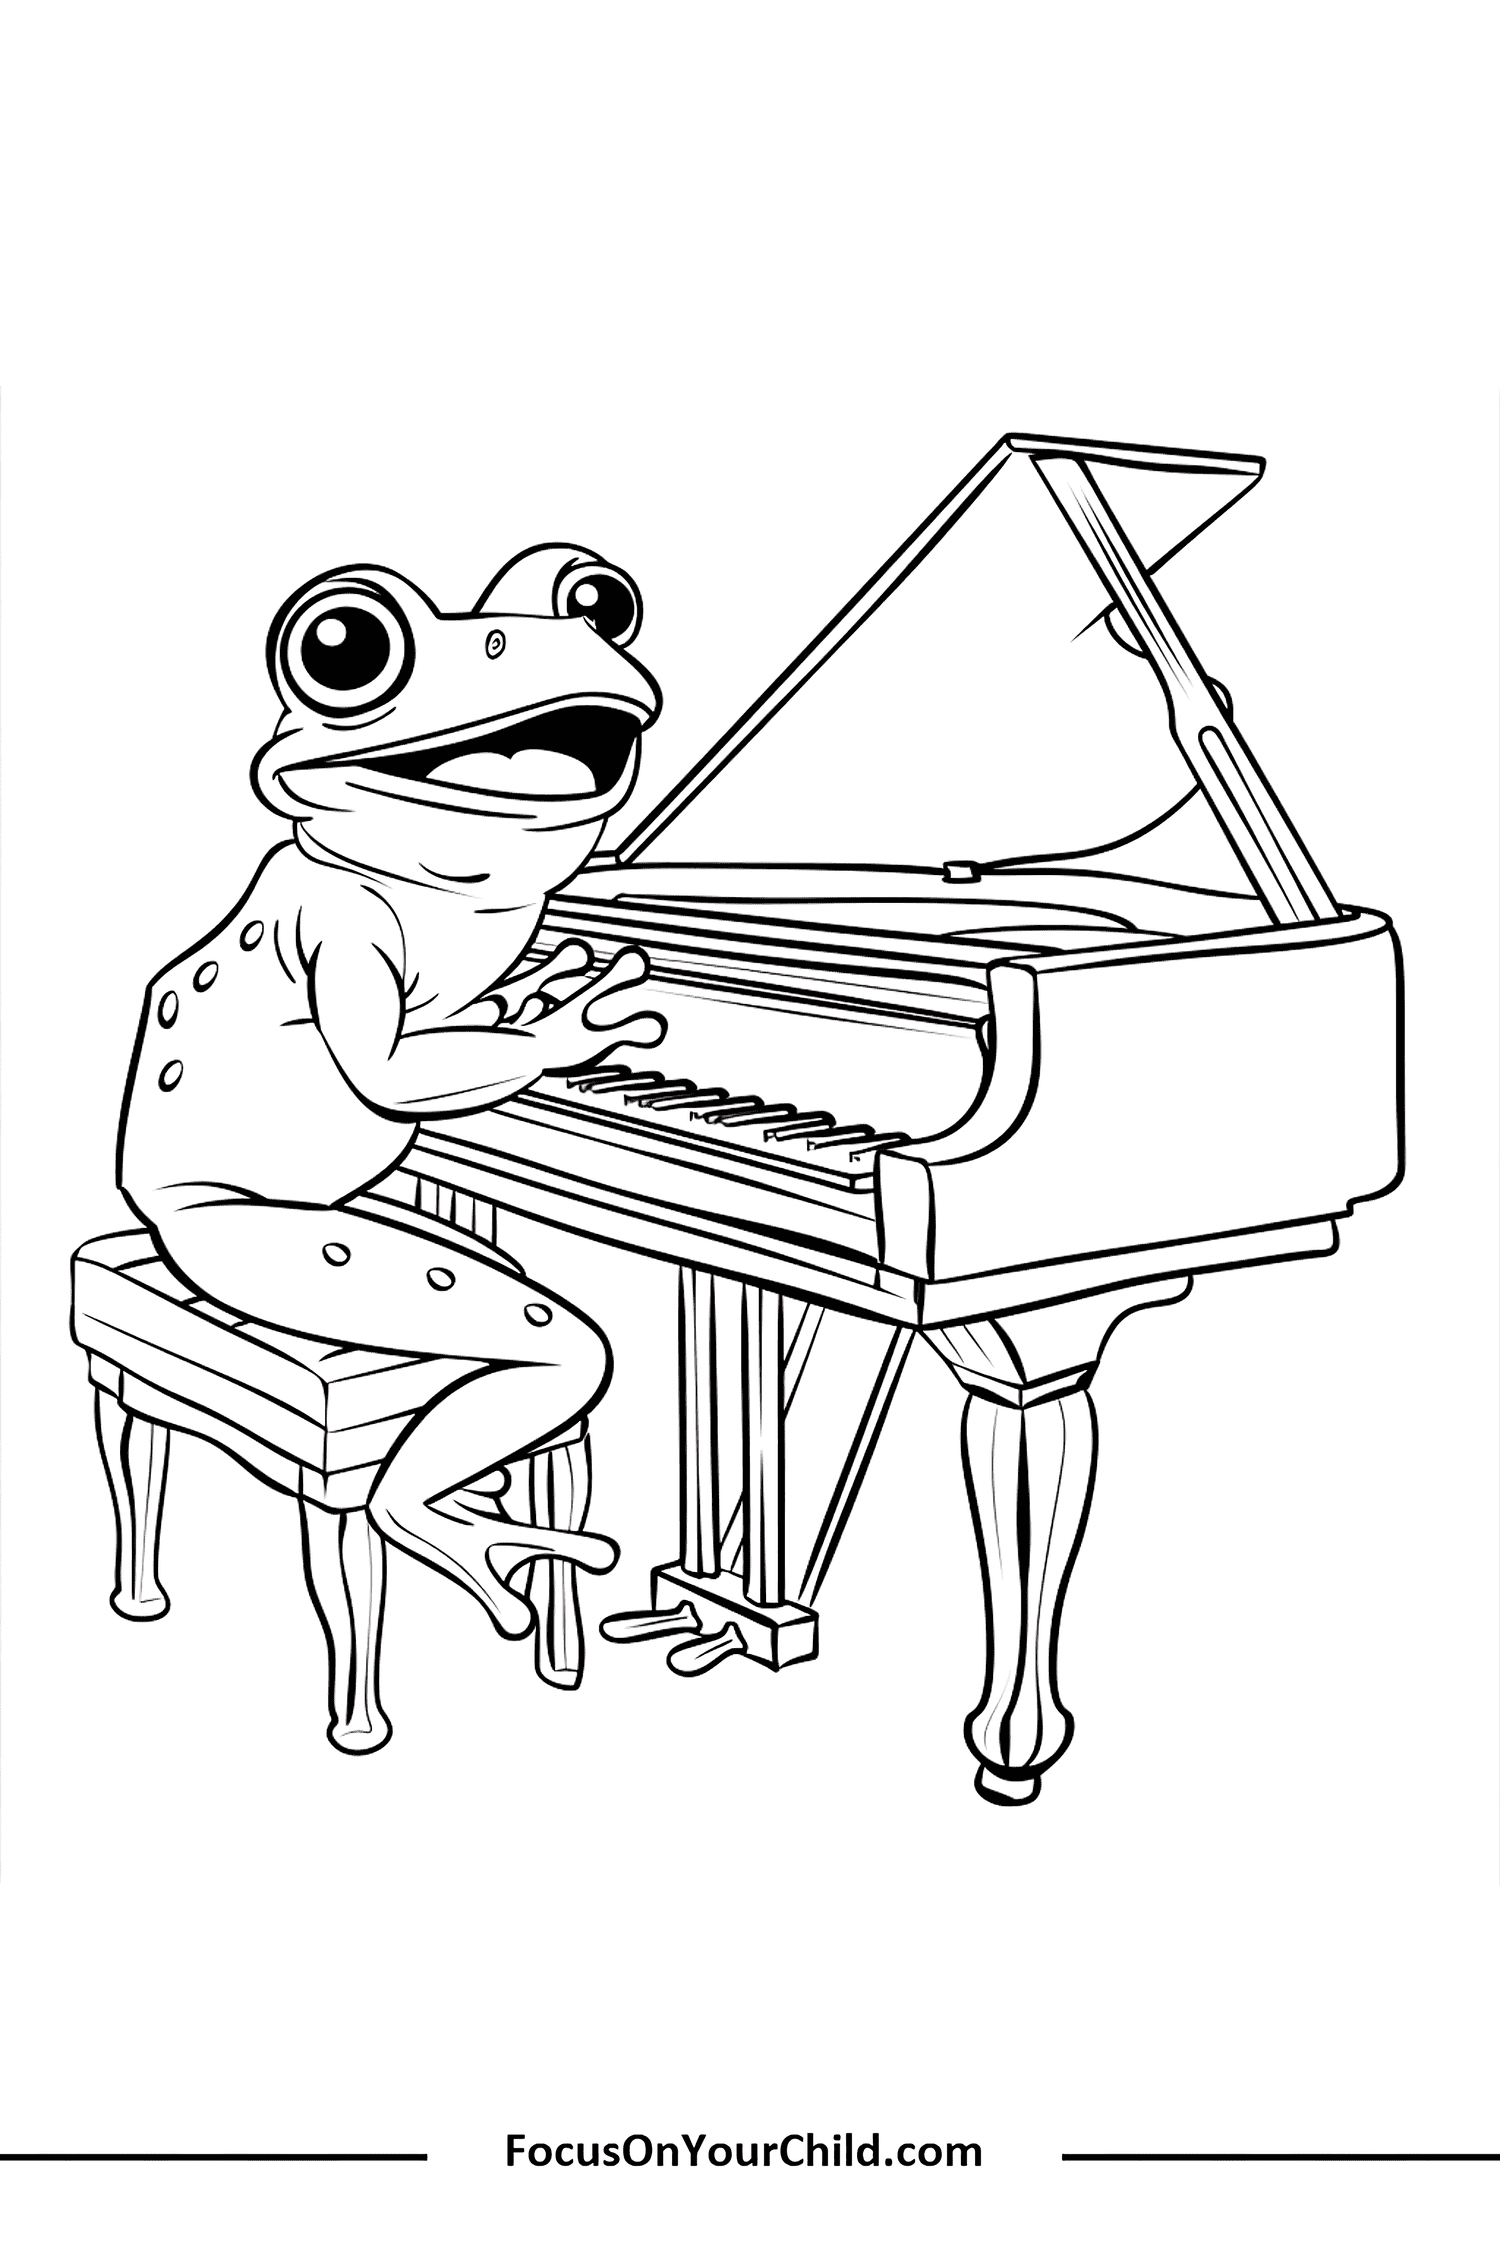 Frog playing grand piano in whimsical black-and-white drawing for childrens educational website.